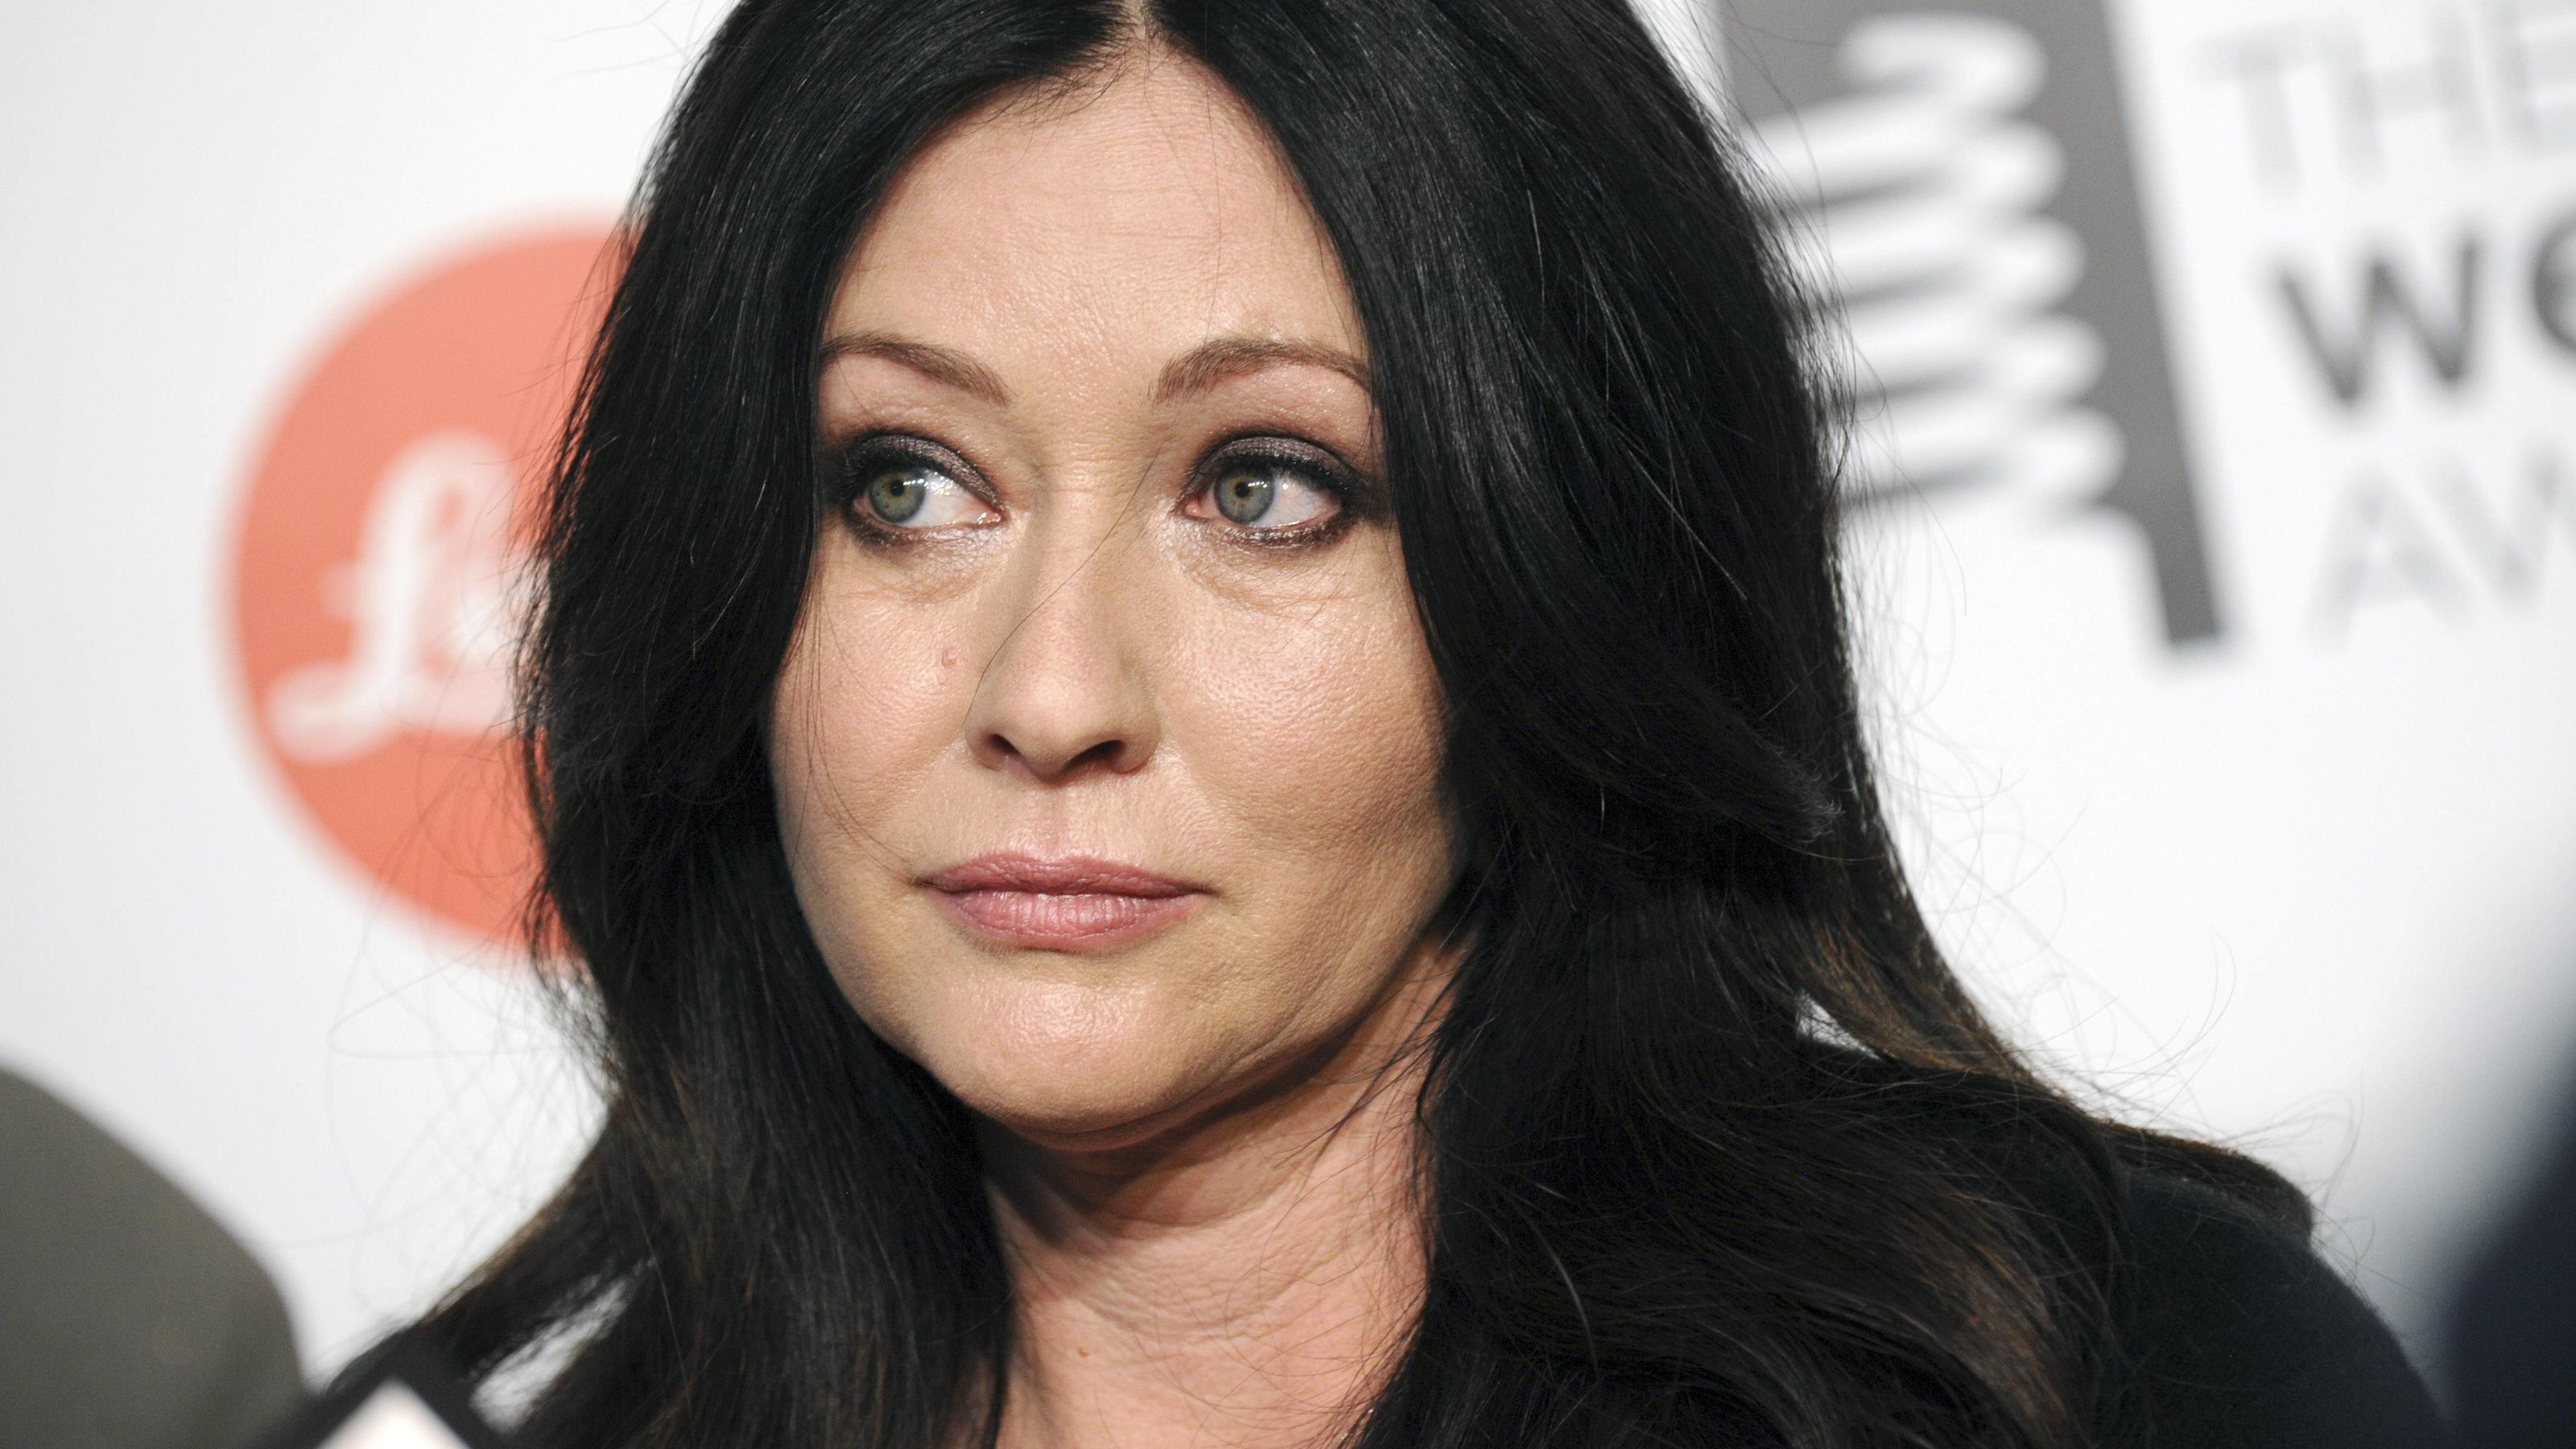 Shannen pictures doherty of Shannen Doherty